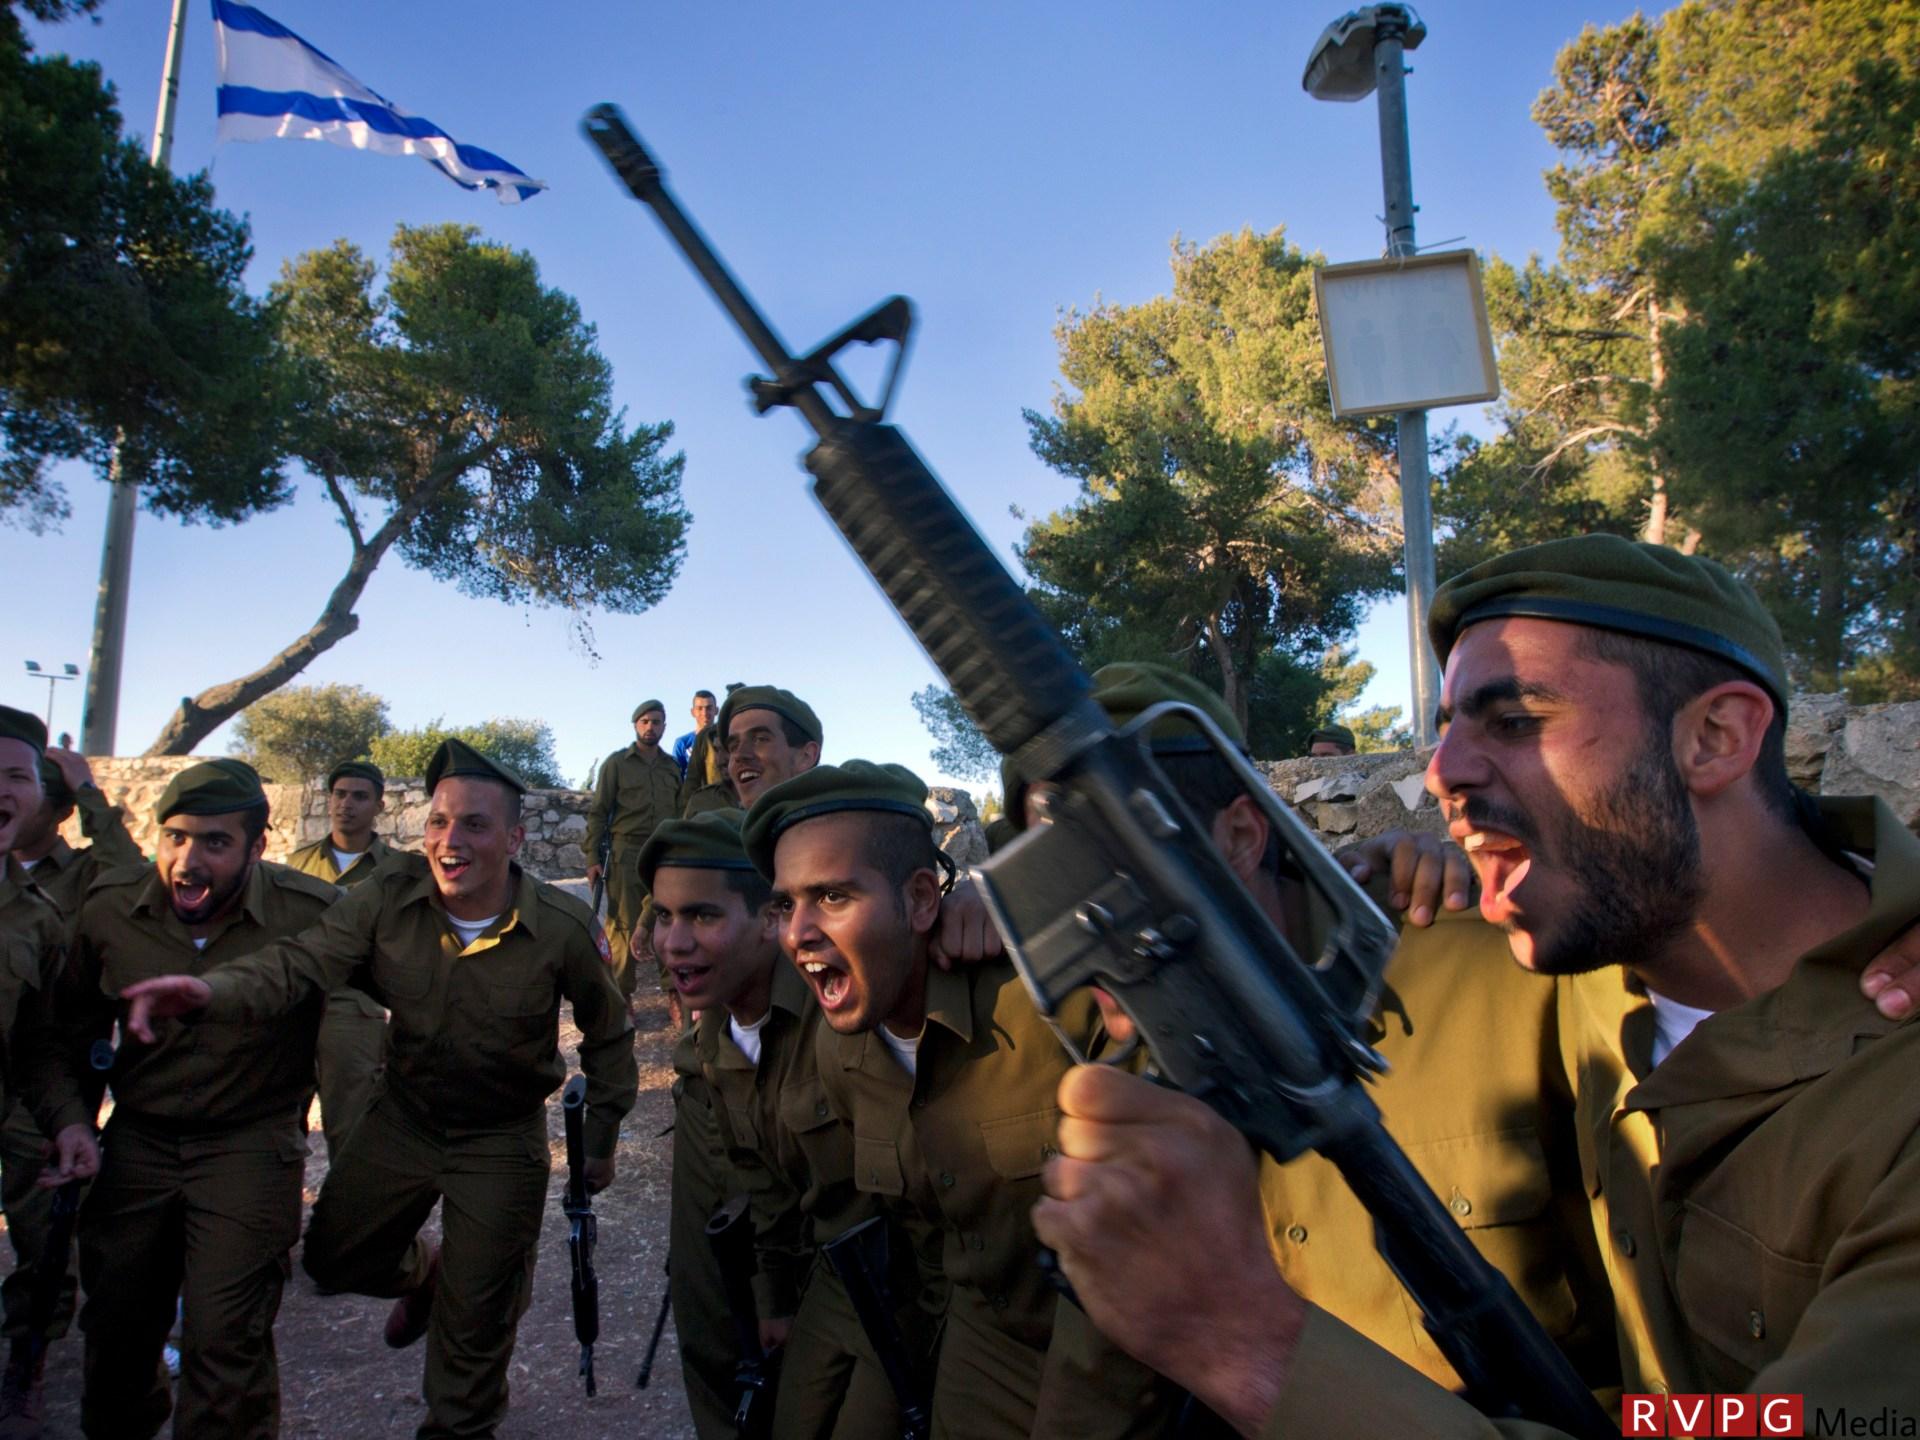 What is Netzah Yehuda, the Israeli battalion that may face US sanctions?